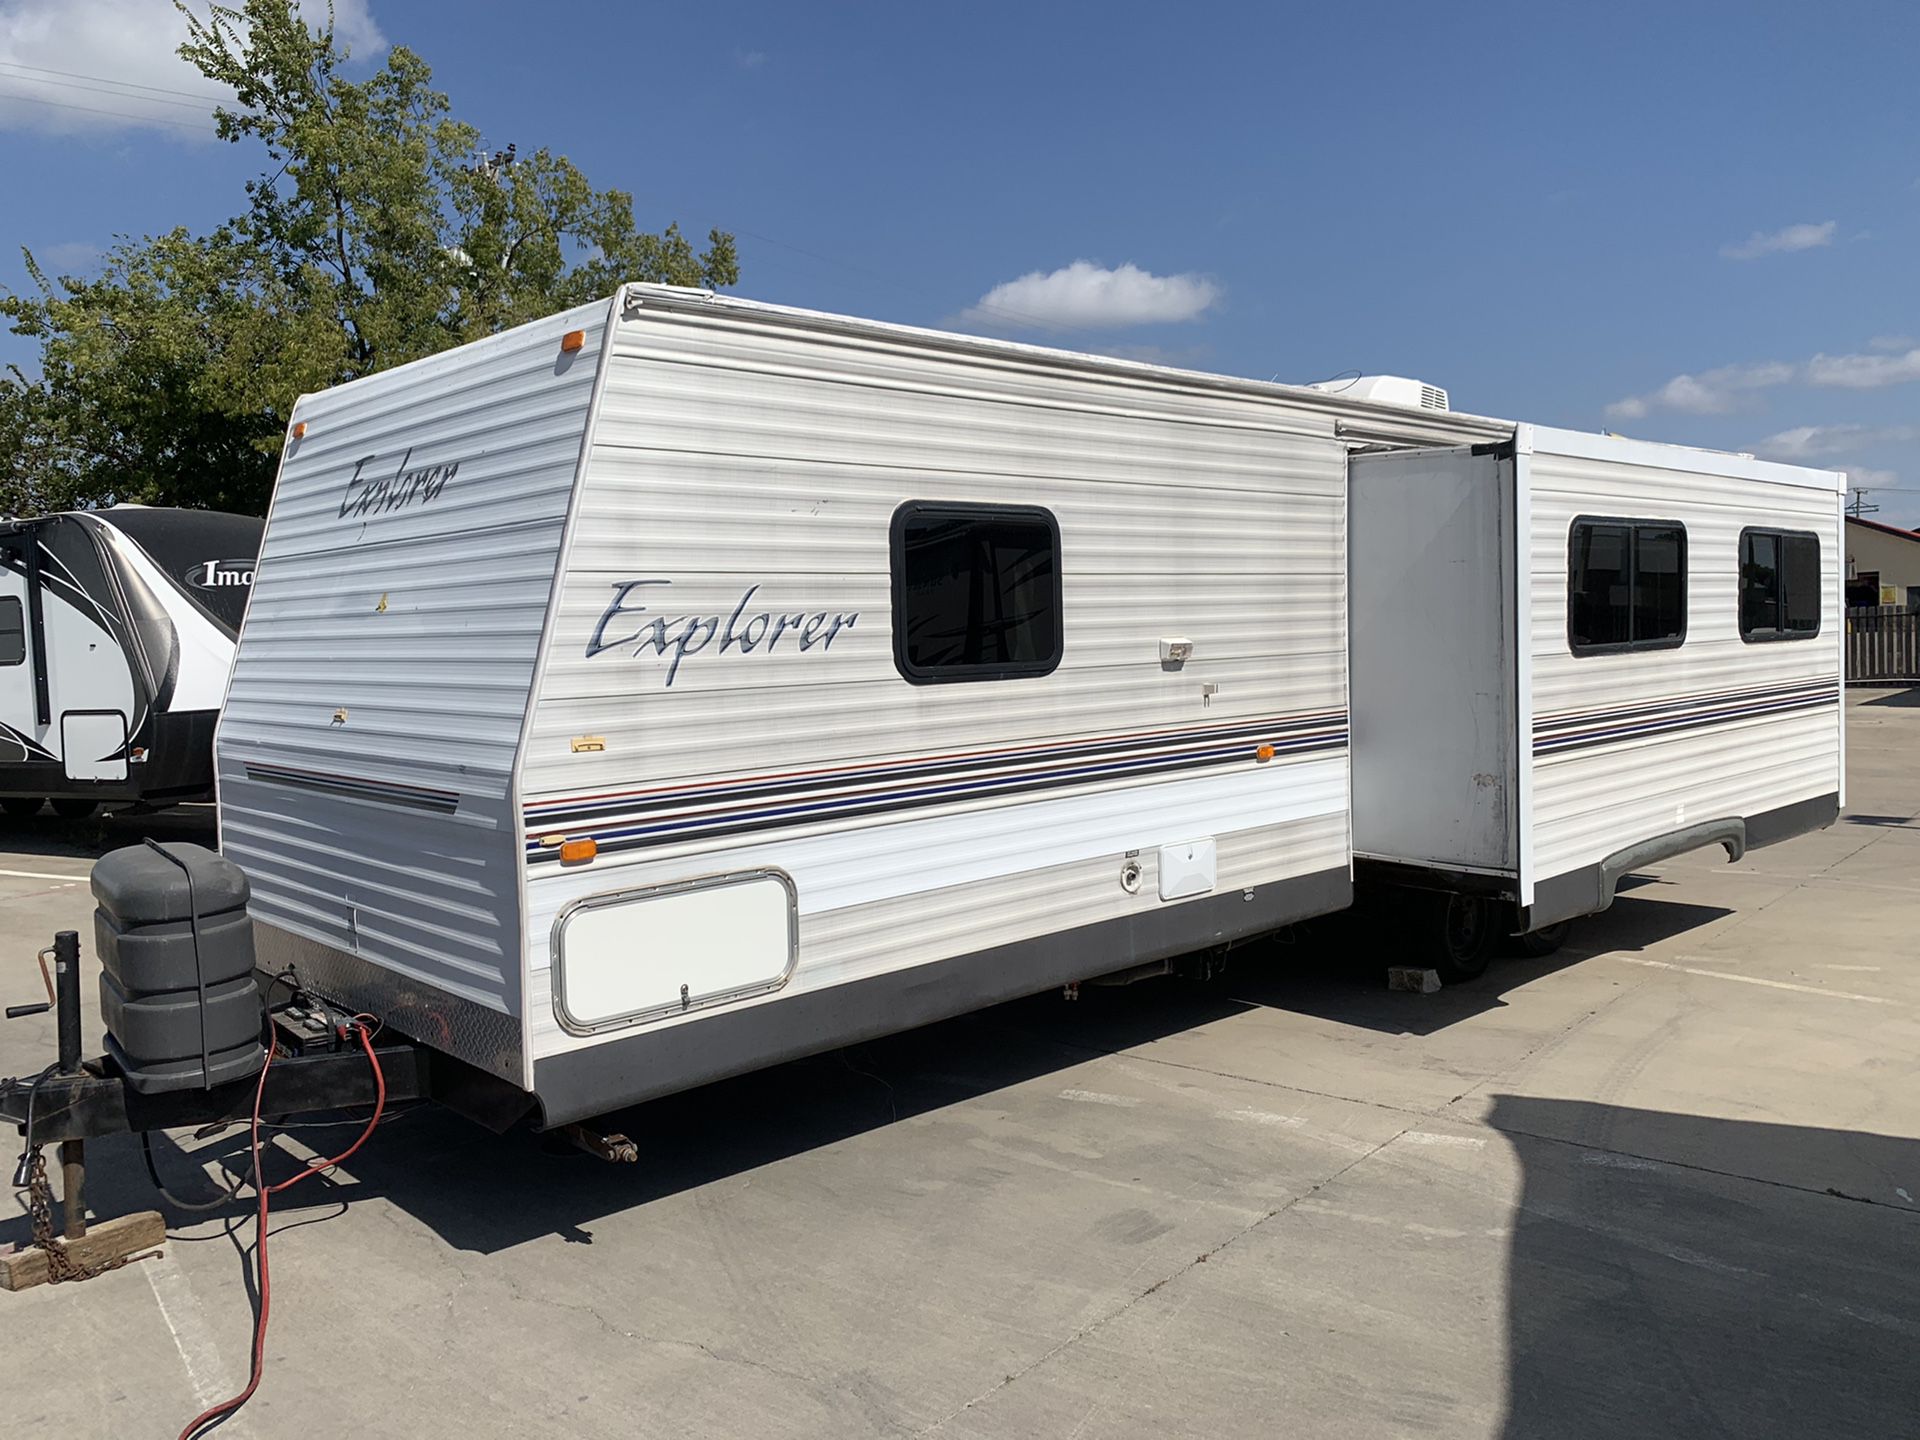 2005 Explorer Travel Trailer 30 feet long with slide out